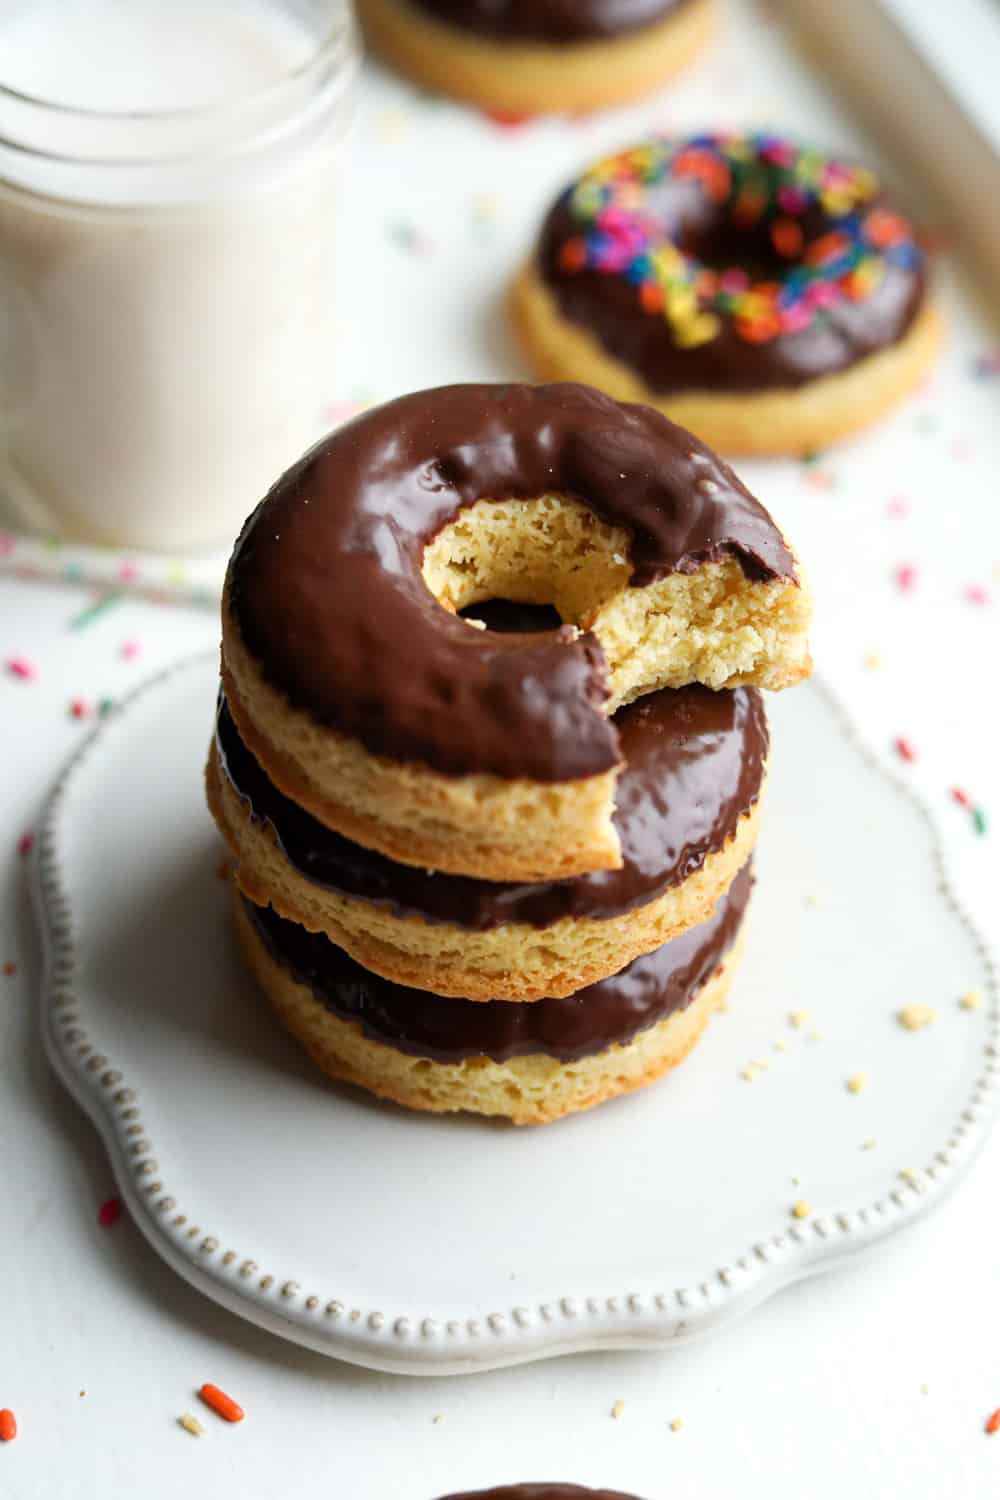 Three donuts stacked on top of each other on a serving dish. There's a glass of milk and other donuts behind them.